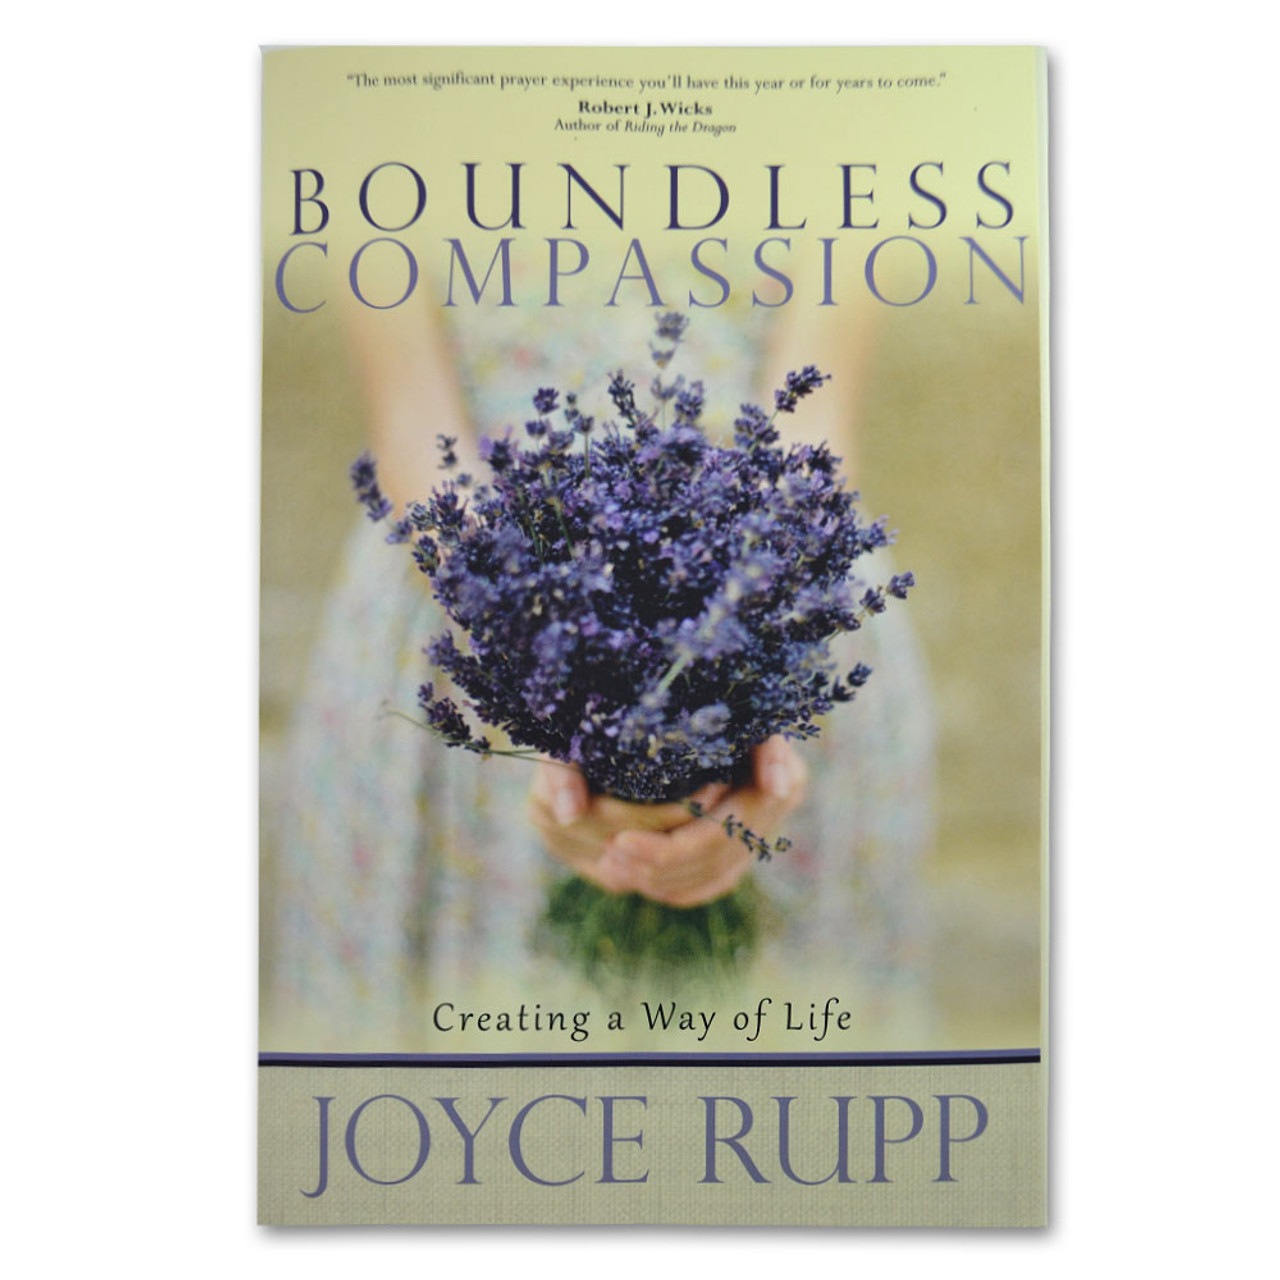 Boundless Compassion by Joyce Rupp